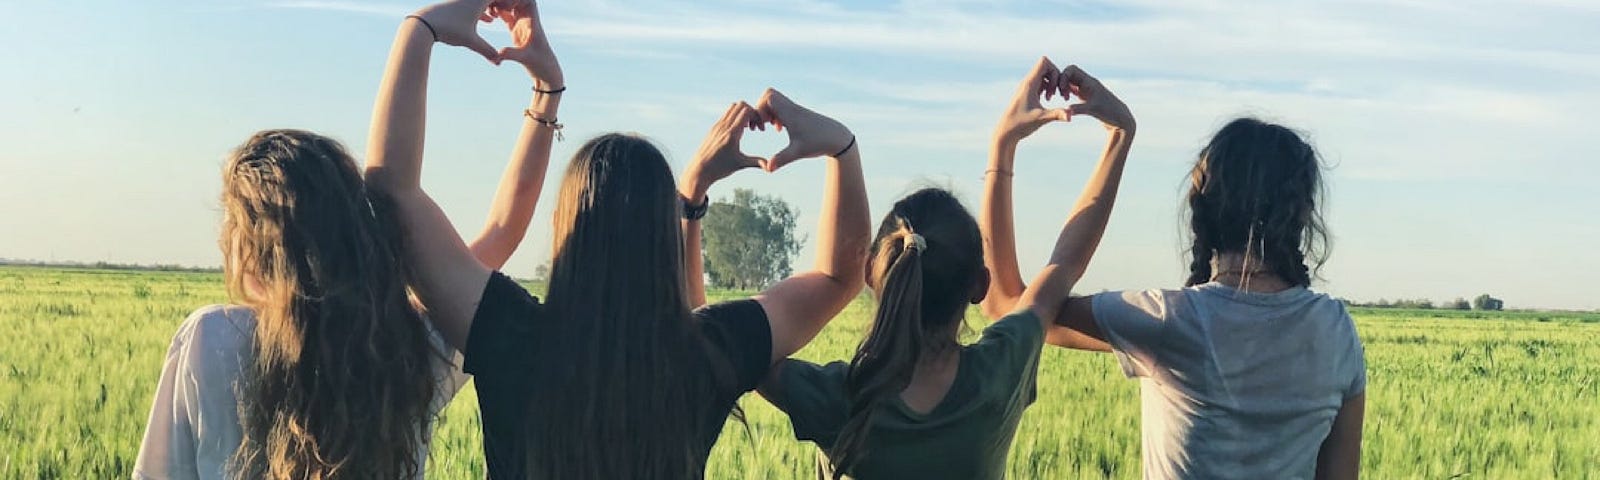 Teenage girls standing in a field and making heart shapes with their interlocked arms